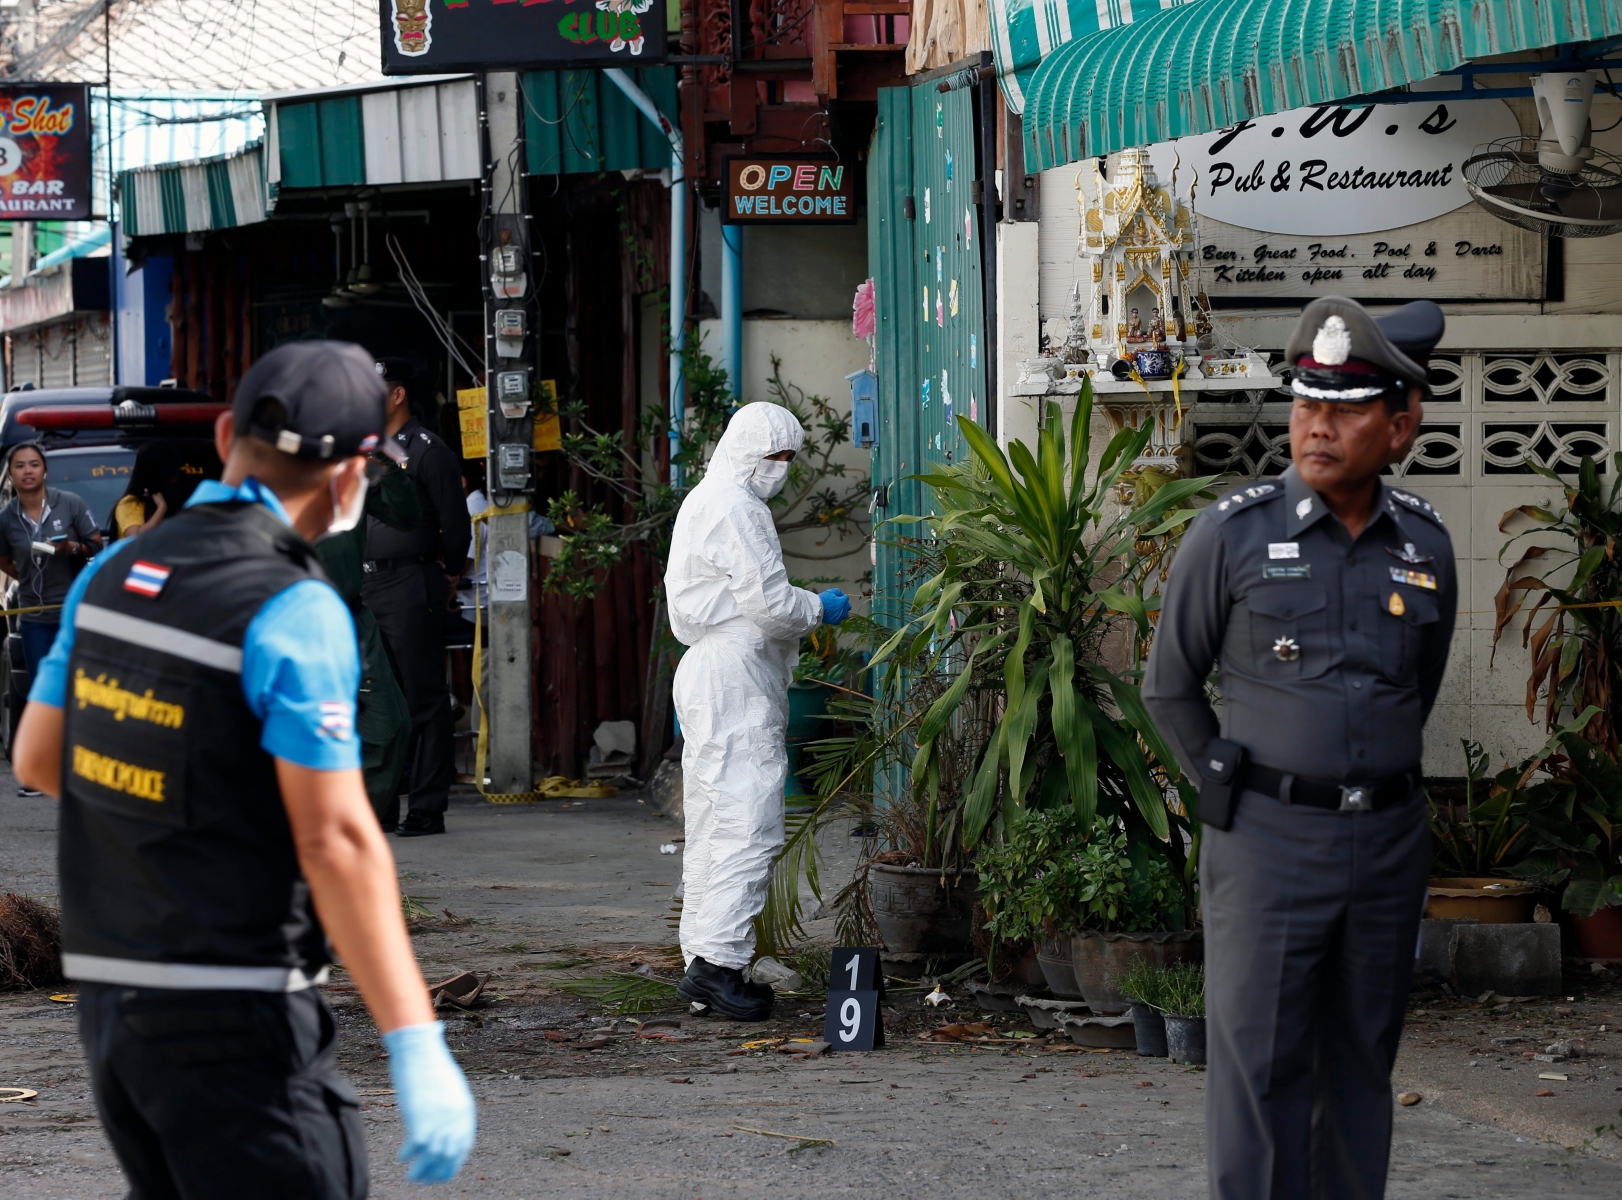 epa05476223 Thai forensic police officers inspect a scene, where a bomb exploded on late 11 August, at a popular tourist area in Hua Hin, Thailand, 12 August 2016. A series of bomb attacks in the resort city of Hua Hin killed at least two people and injured more than 20 people including foreign tourists.  EPA/RUNGROJ YONGRIT THAILAND BOMB ATTACKS